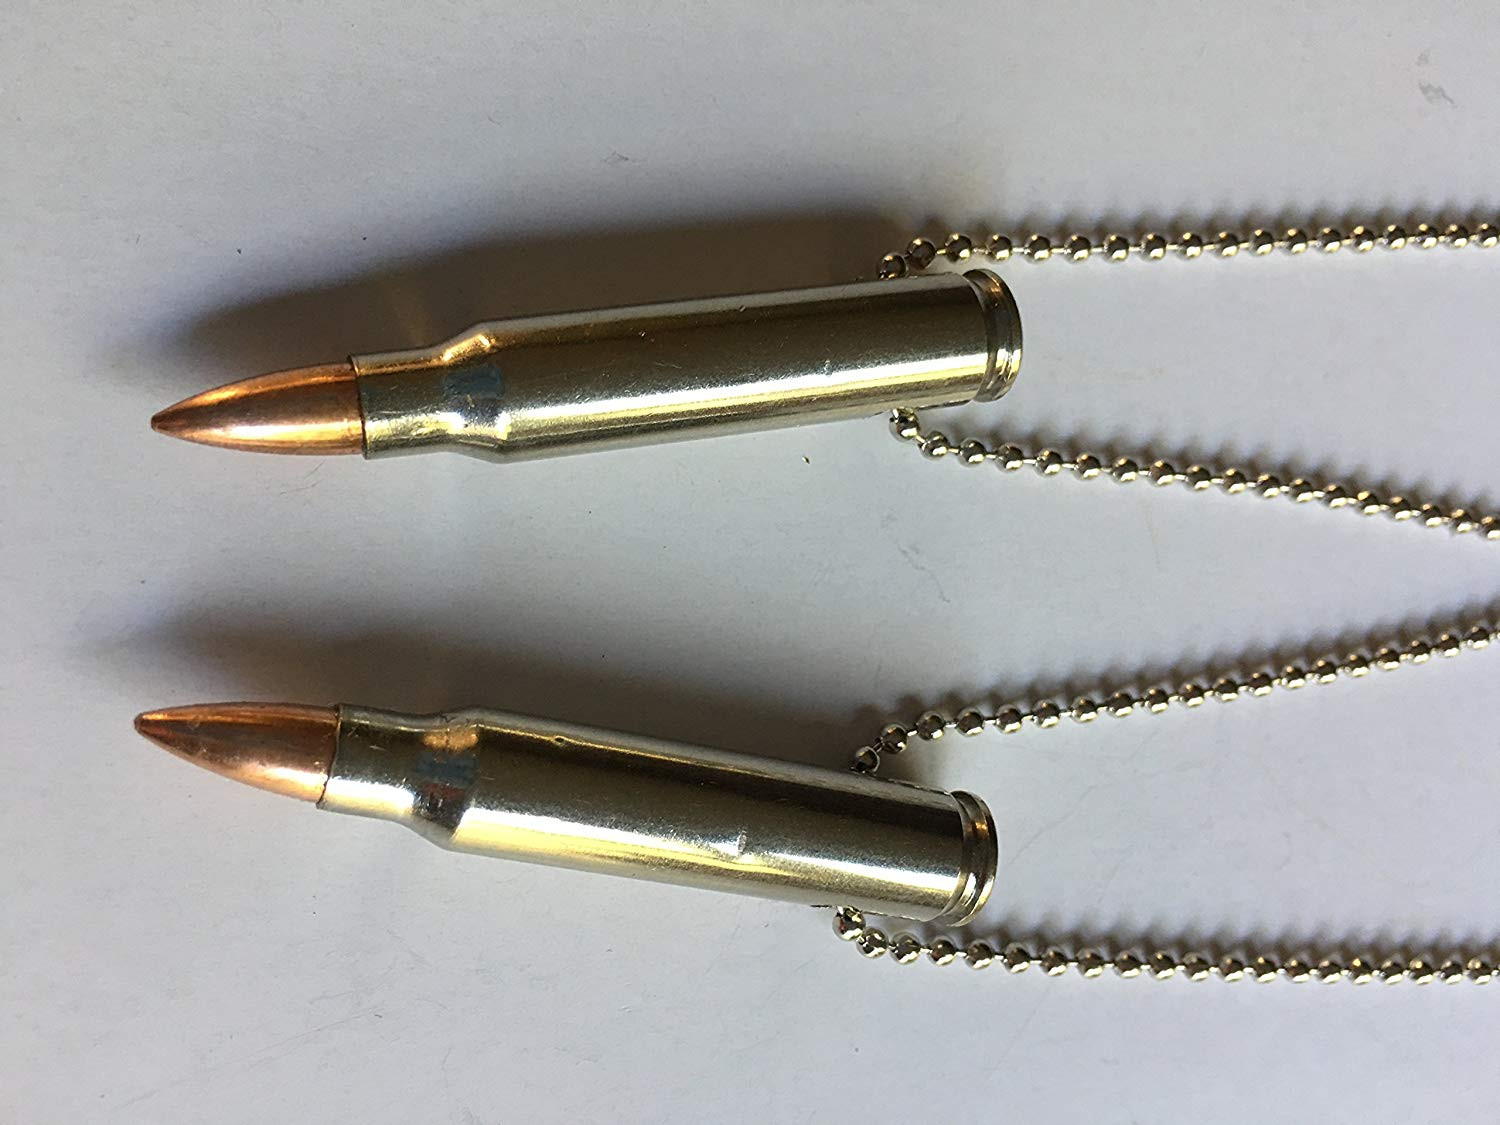 His And Hers Bullet Necklaces
 Amazon Couples Bullet Necklaces Nickel 223 REM His